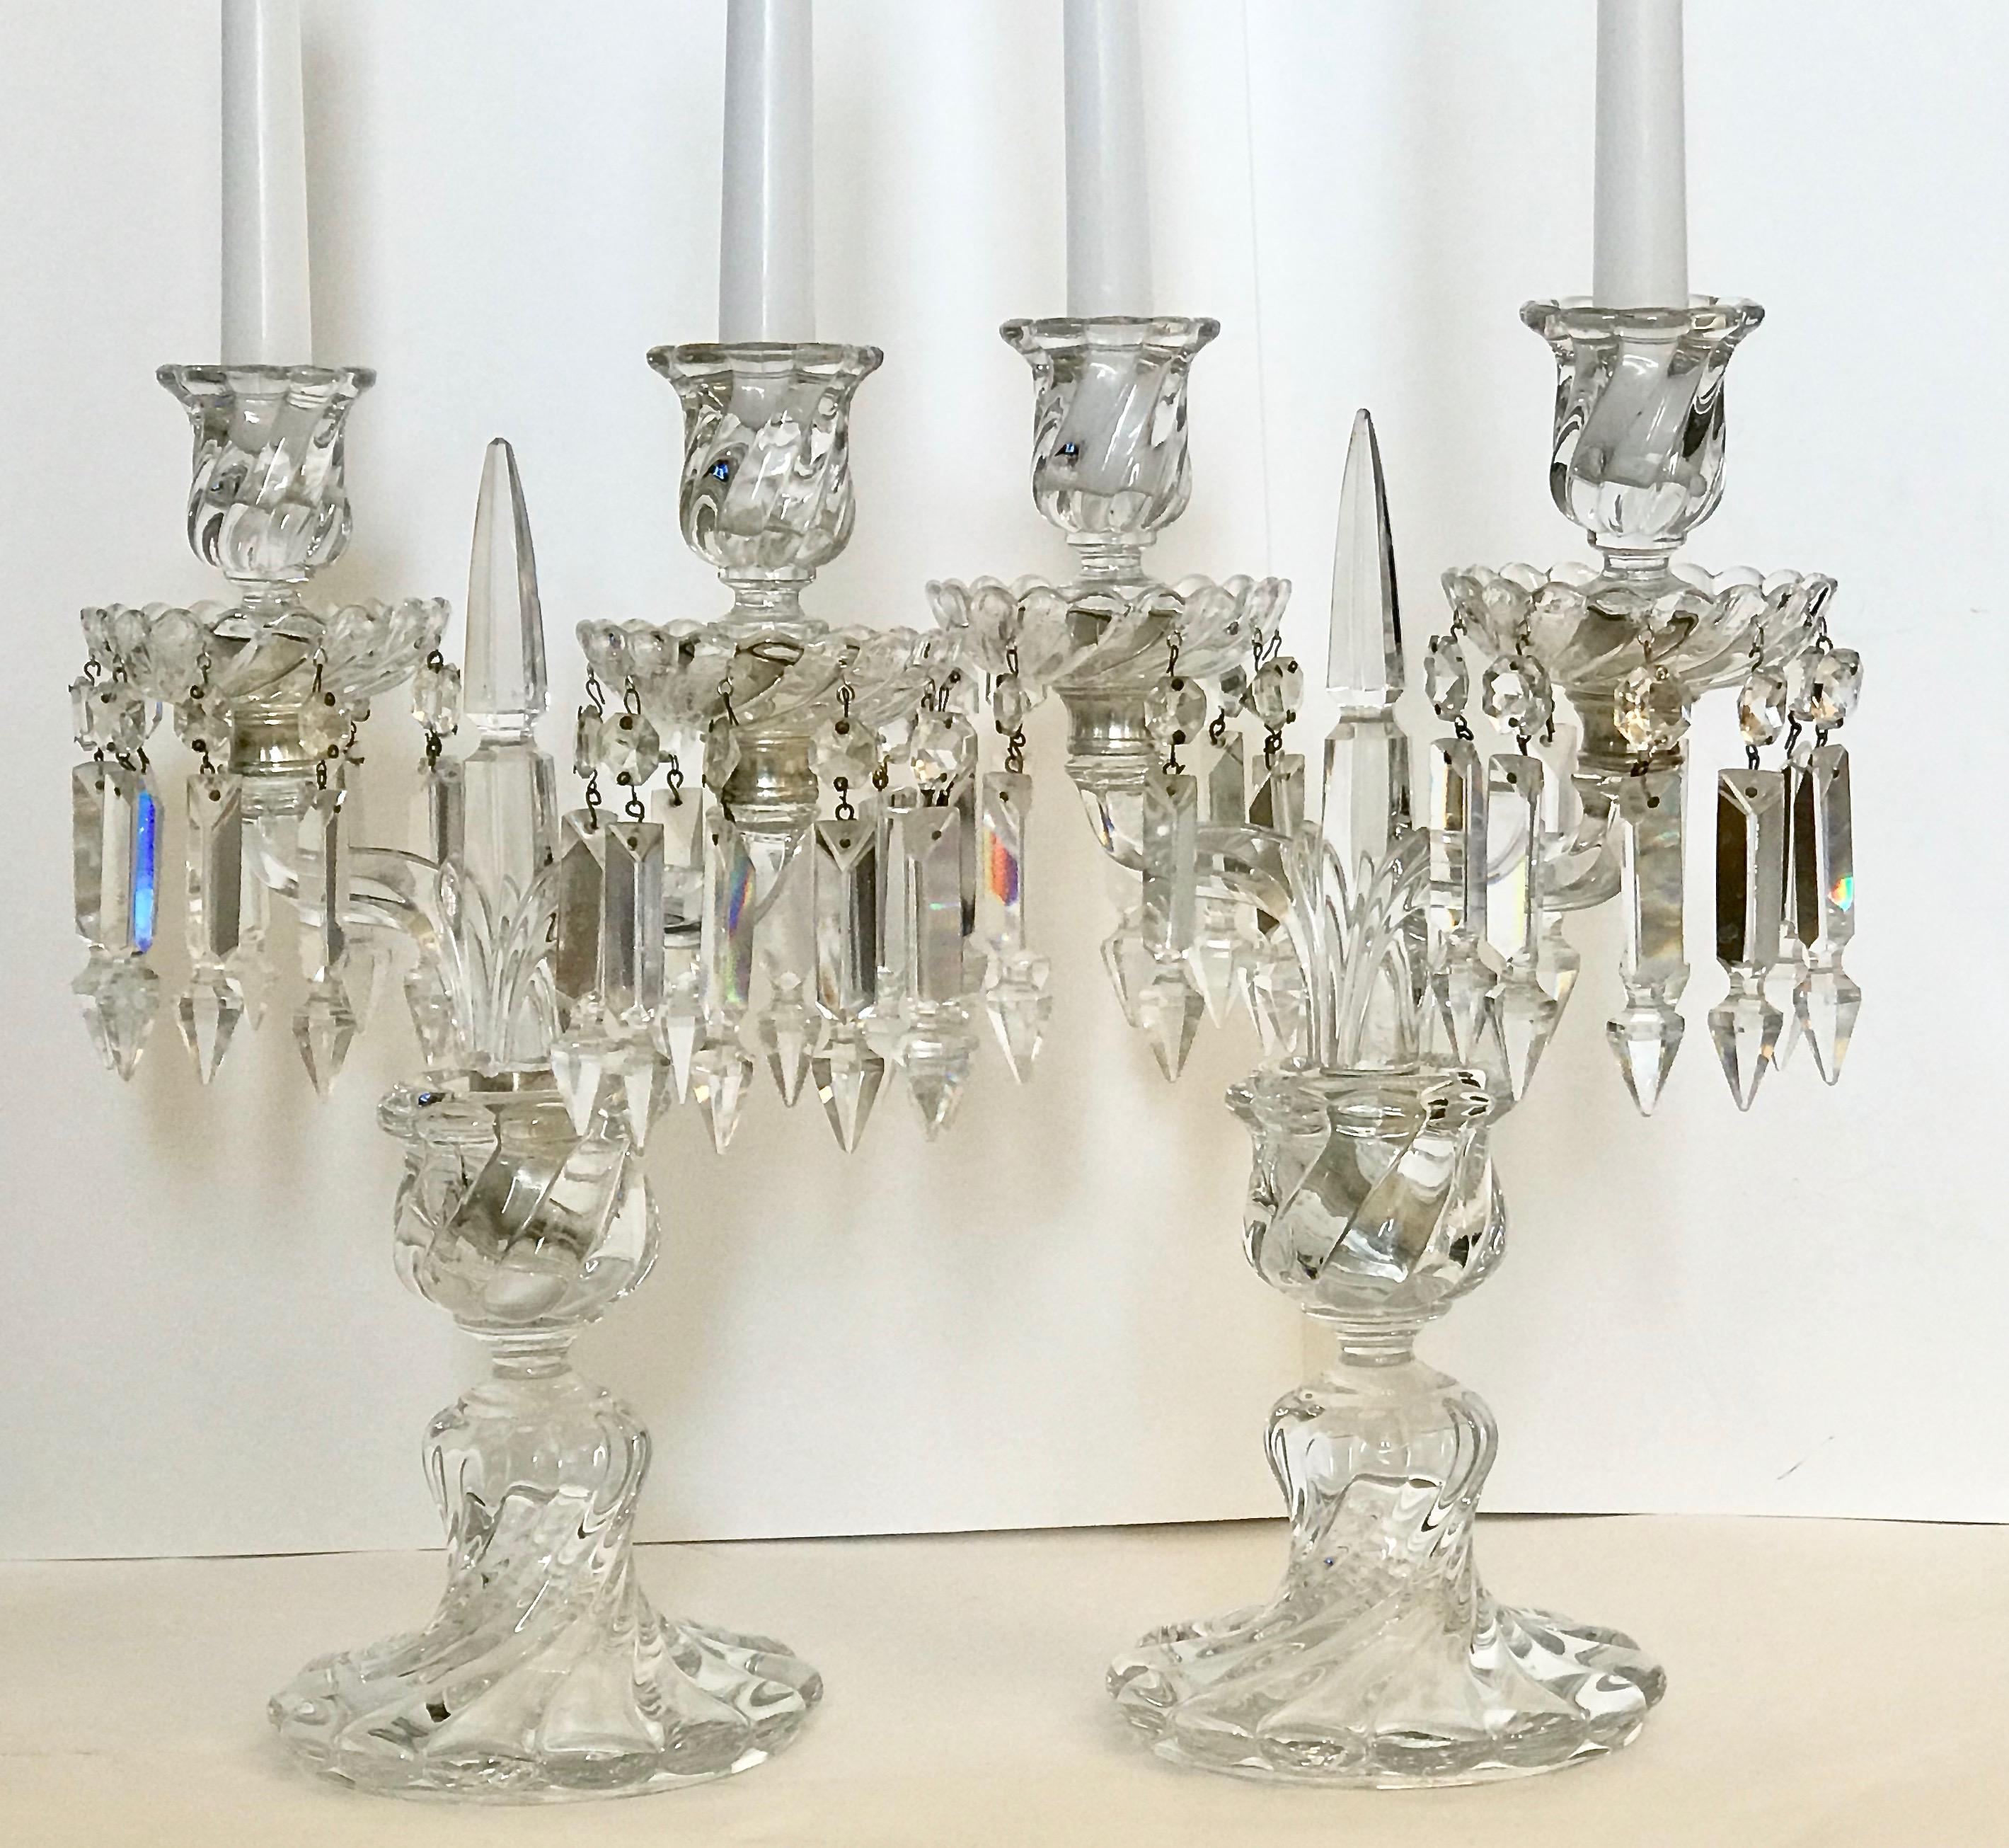 A fine cut crystal pair of candelabras, each with two candlestick arms, cut crystal pendants below the candle cups, raised on a circular bamboo swirl design cut crystal base.
Late 19th century or early 20th century, bamboo model by